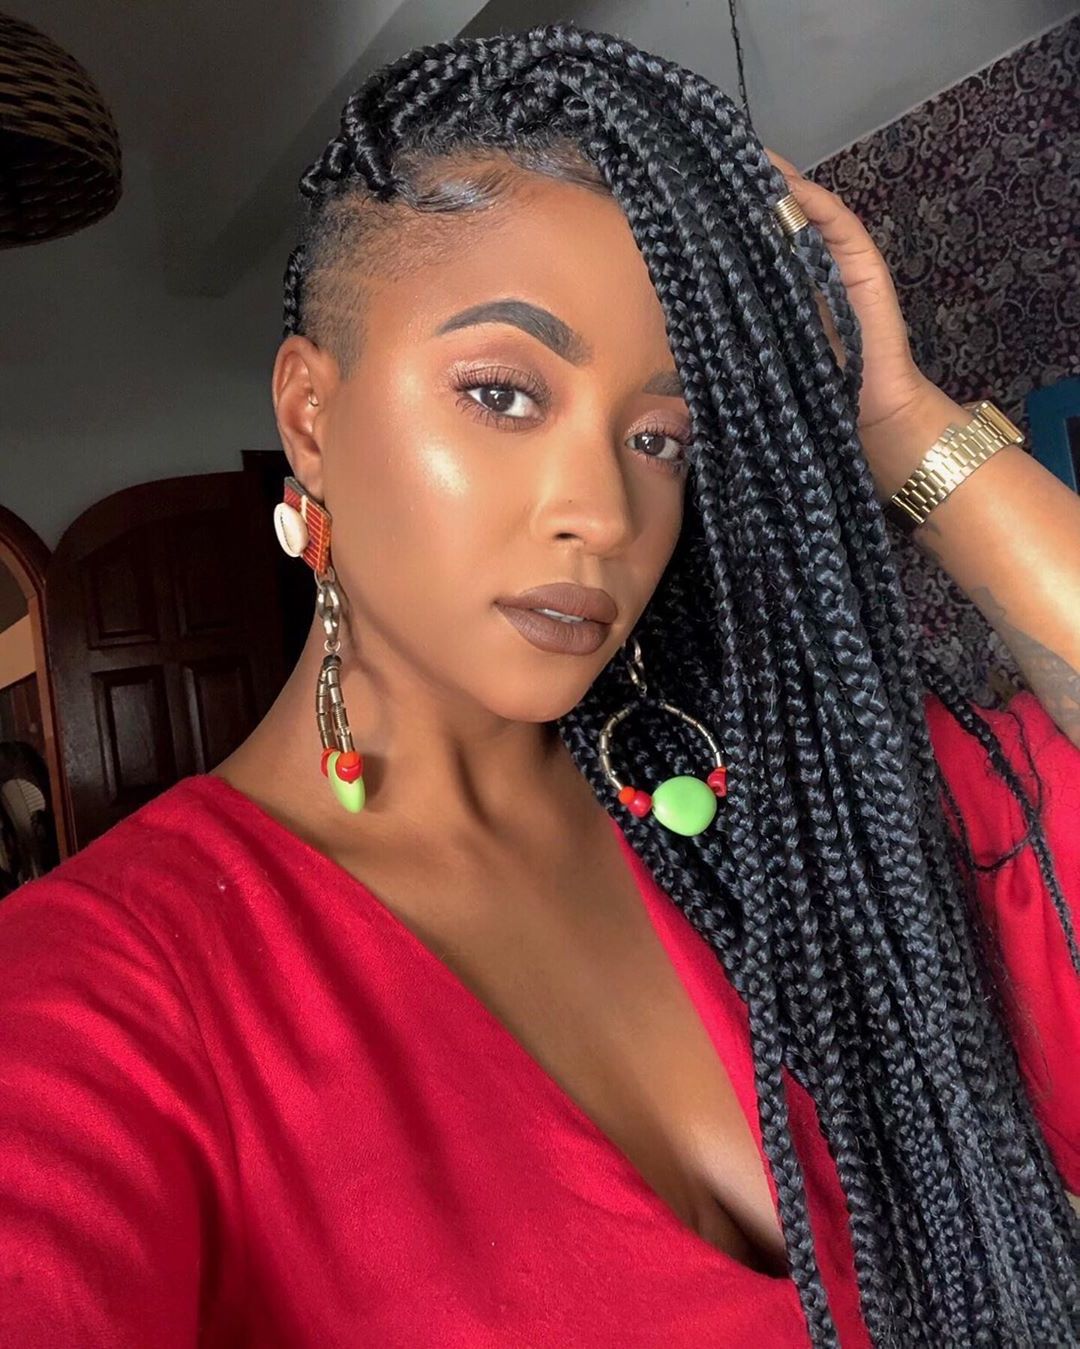 Popular Side Shaved Cornrows Braids Hairstyles With Box Braids With Shaved Sides: 21 Stylish Ways To Rock The Look (View 19 of 21)